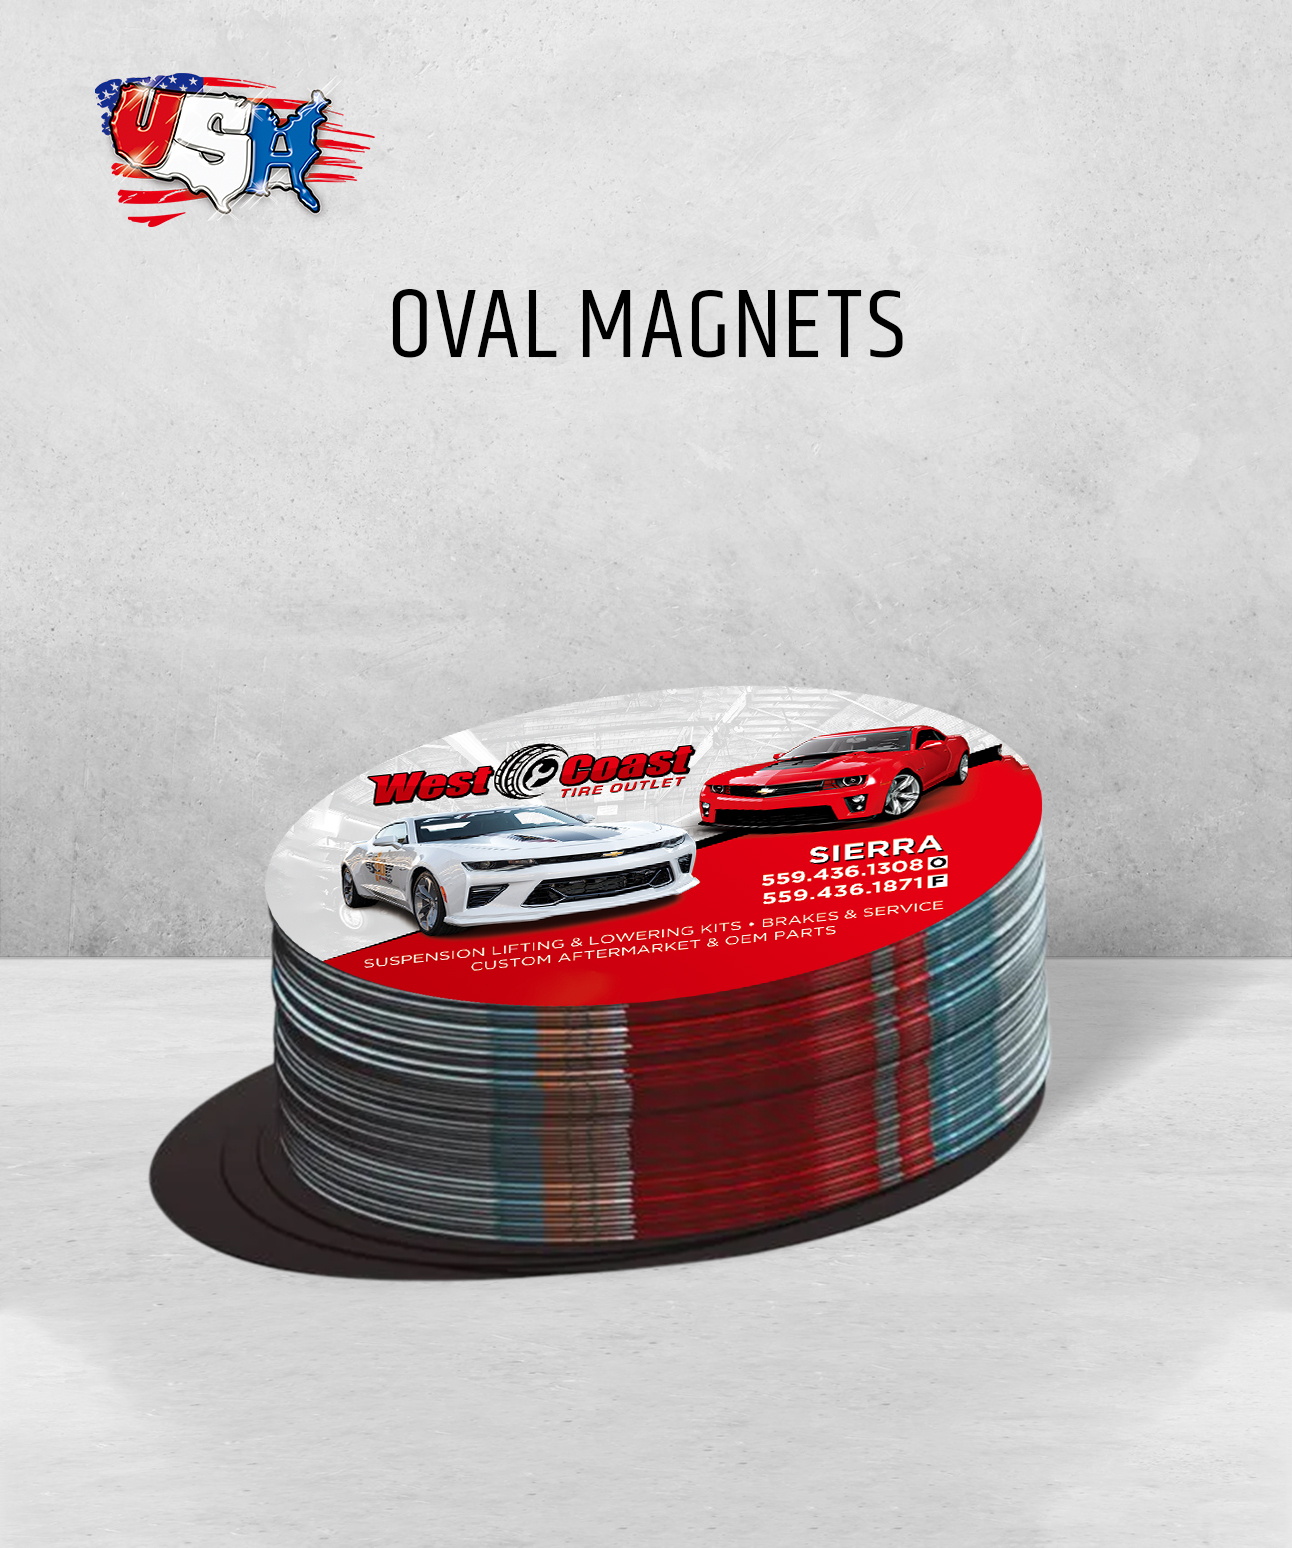 Oval Magnets